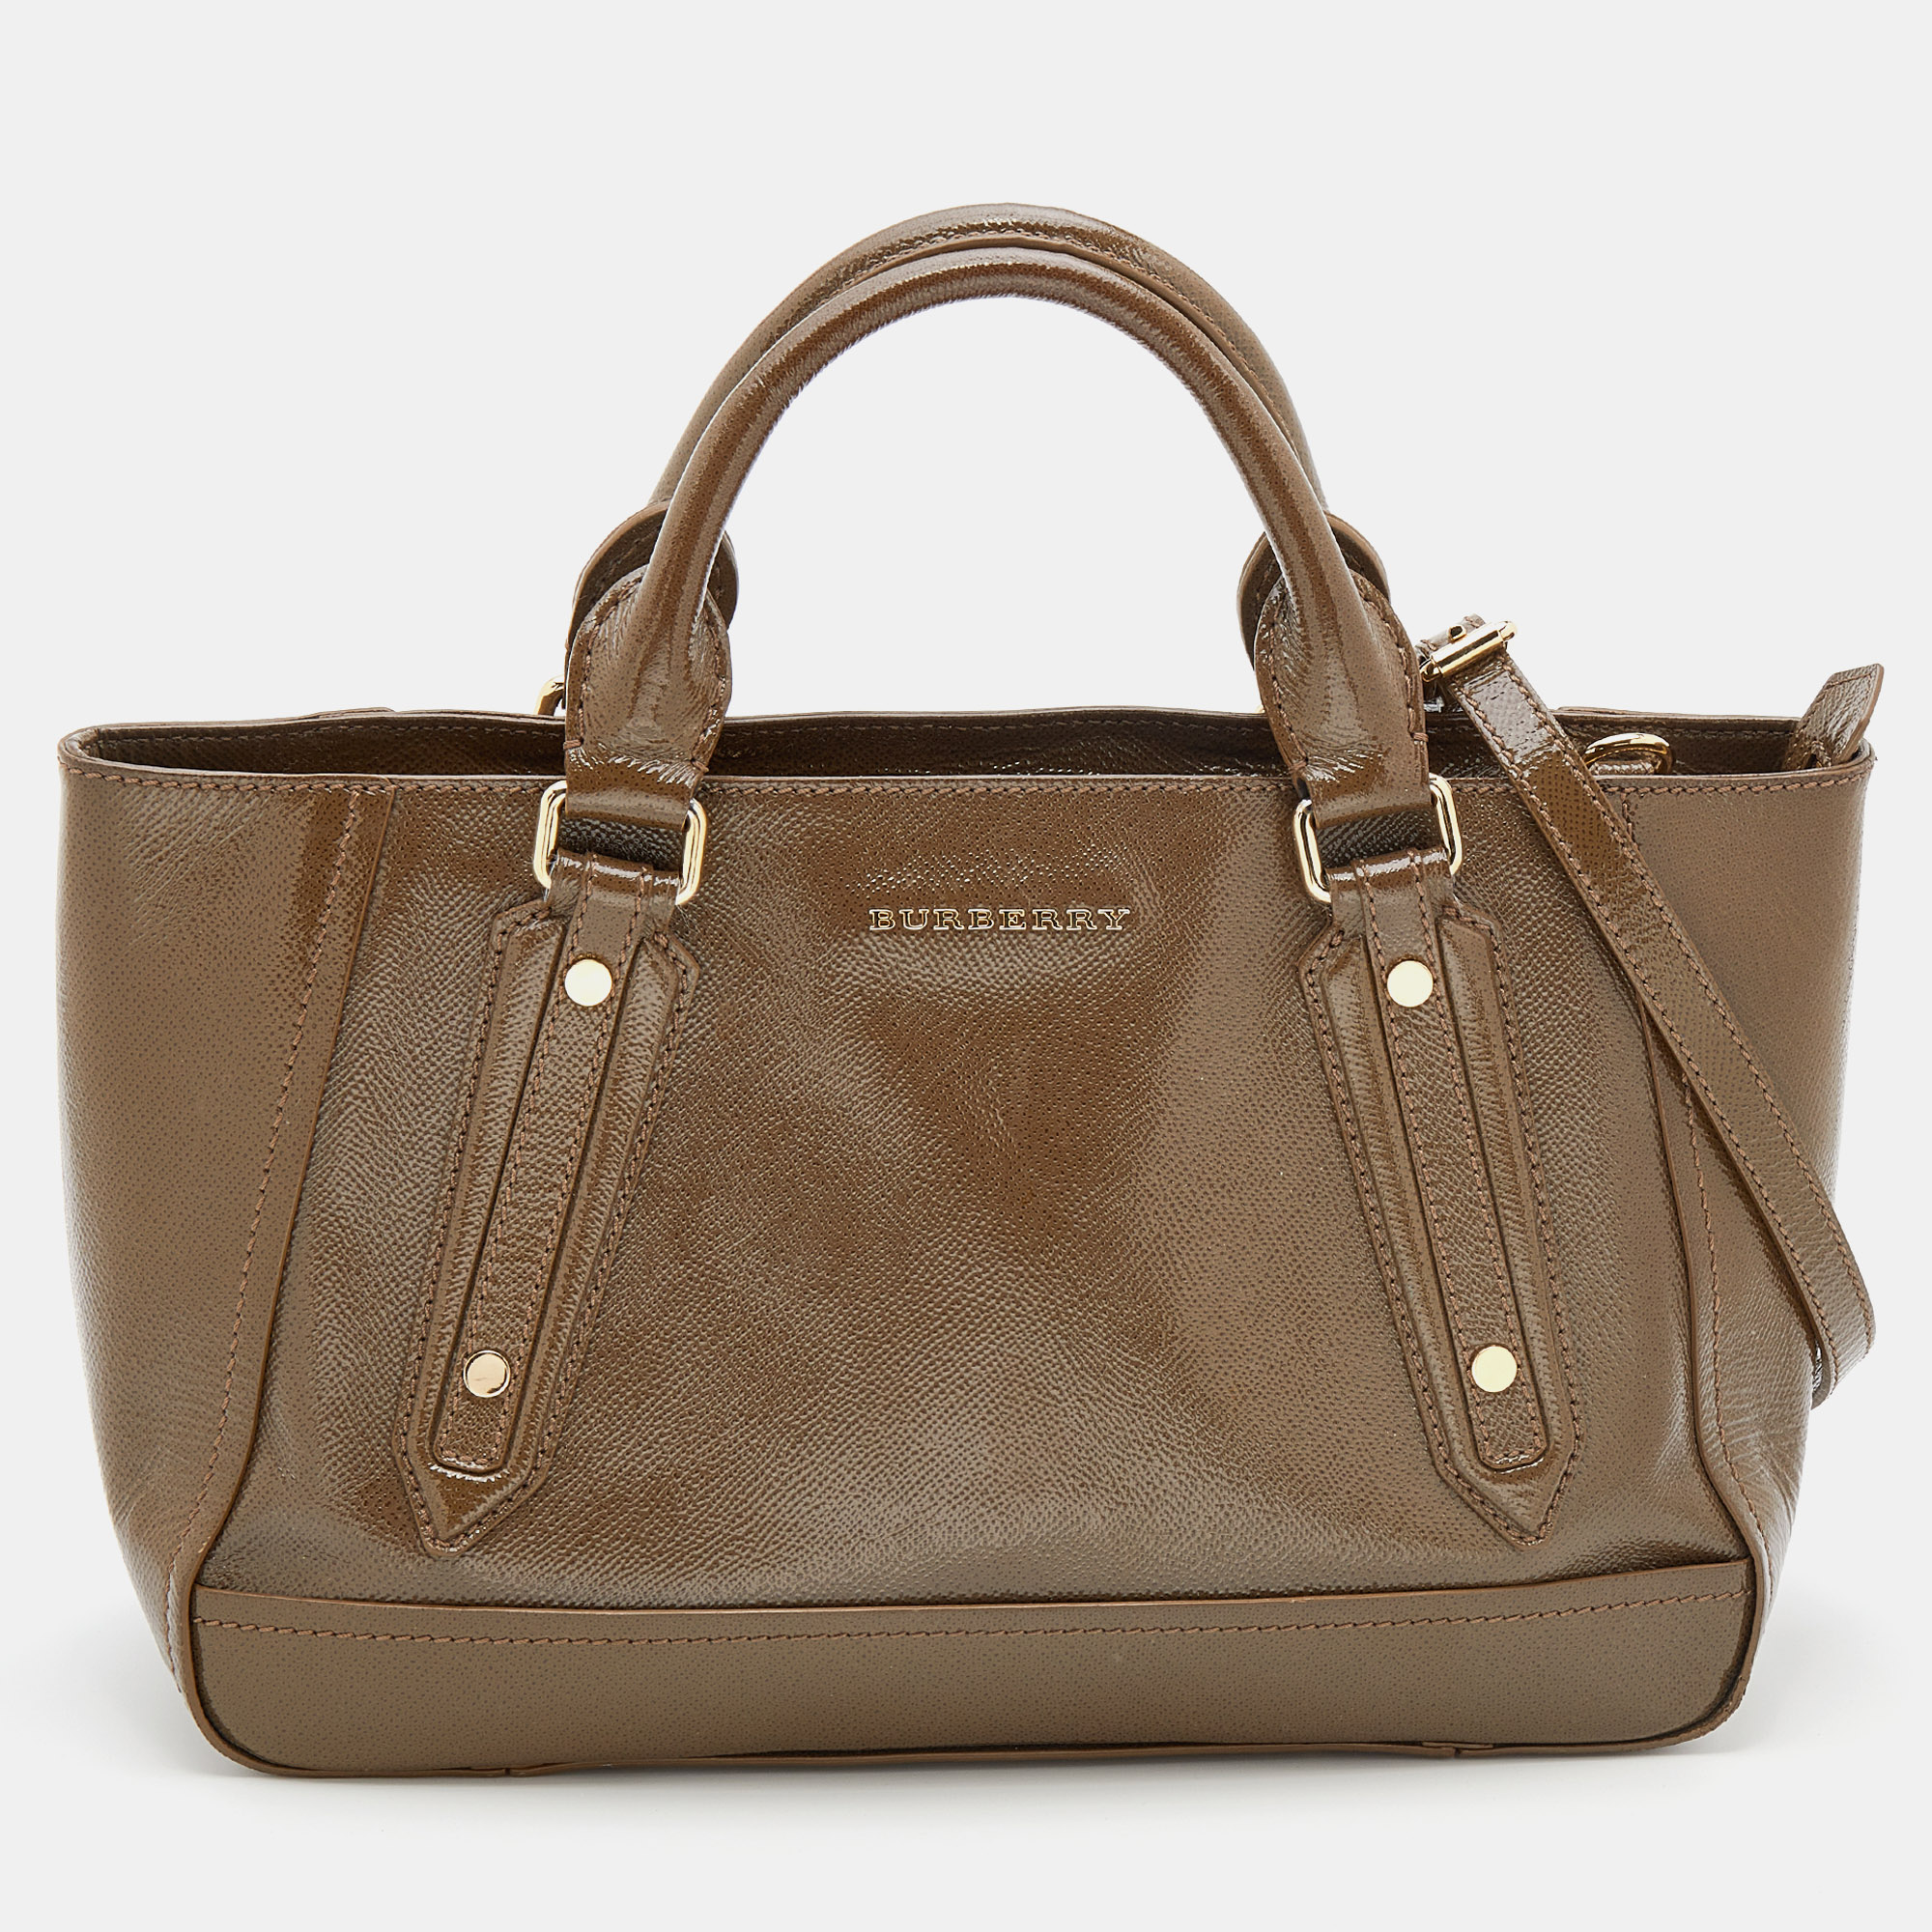 Burberry brings us this classy tote that has been crafted from patent leather. It has a brown hue a spacious fabric interior capable of carrying your essentials with ease and a brand signature on the front. The piece comes equipped with protective metal feet two top handles and a detachable shoulder strap.